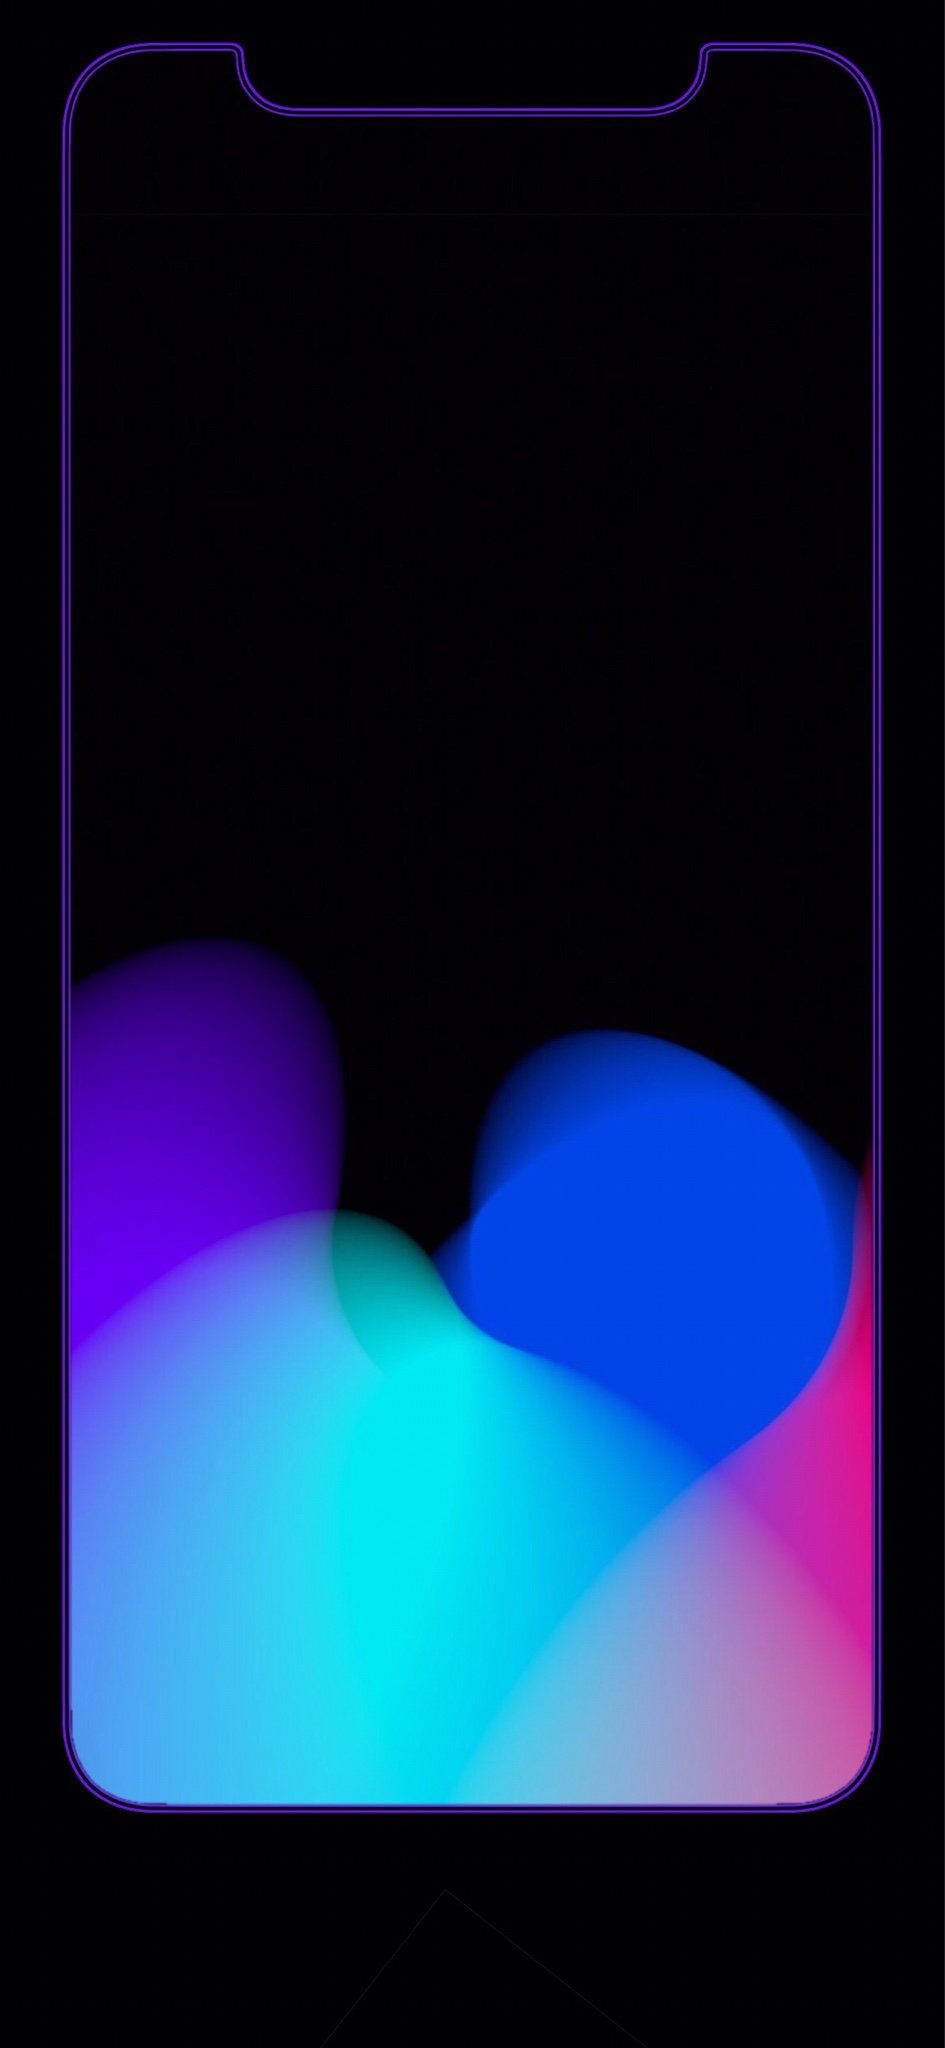 The iPhone X Wallpaper Thread, iPad, iPod Forums at iMore.com. New wallpaper iphone, iPhone homescreen wallpaper, Apple wallpaper iphone